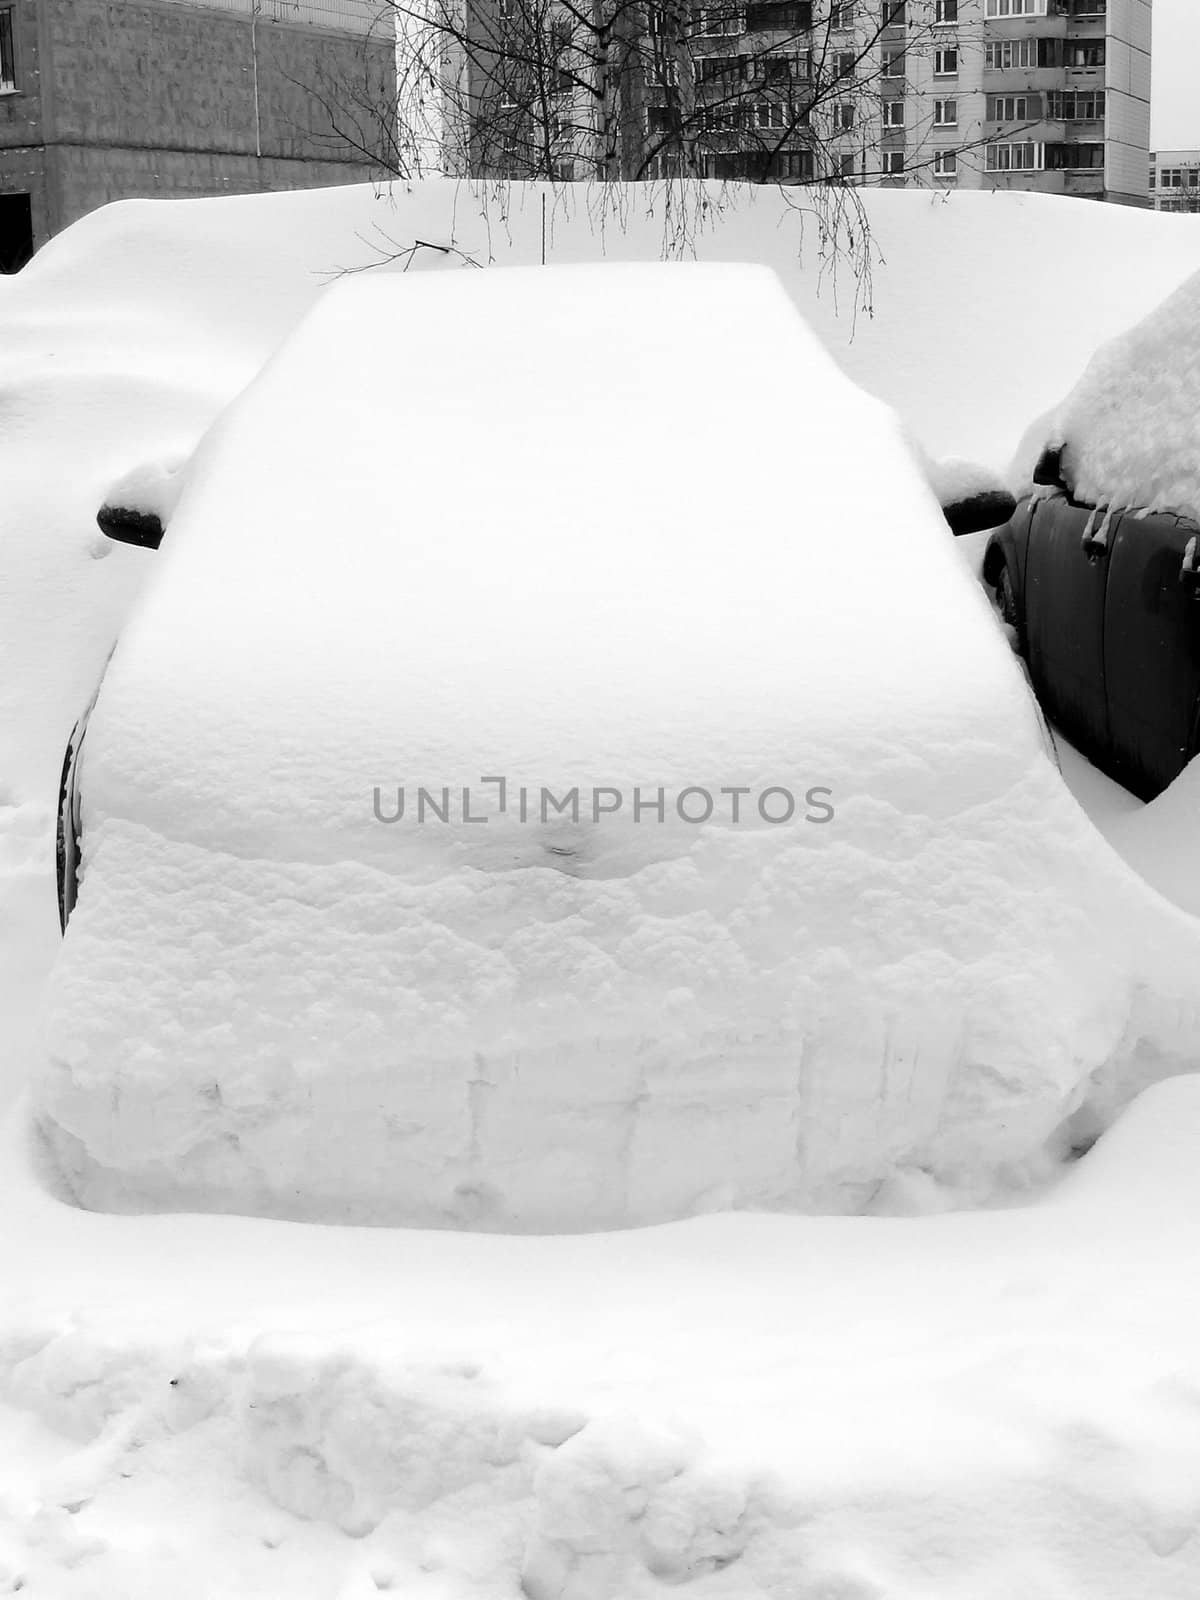 Car with a pile of snow on the top after snowfall